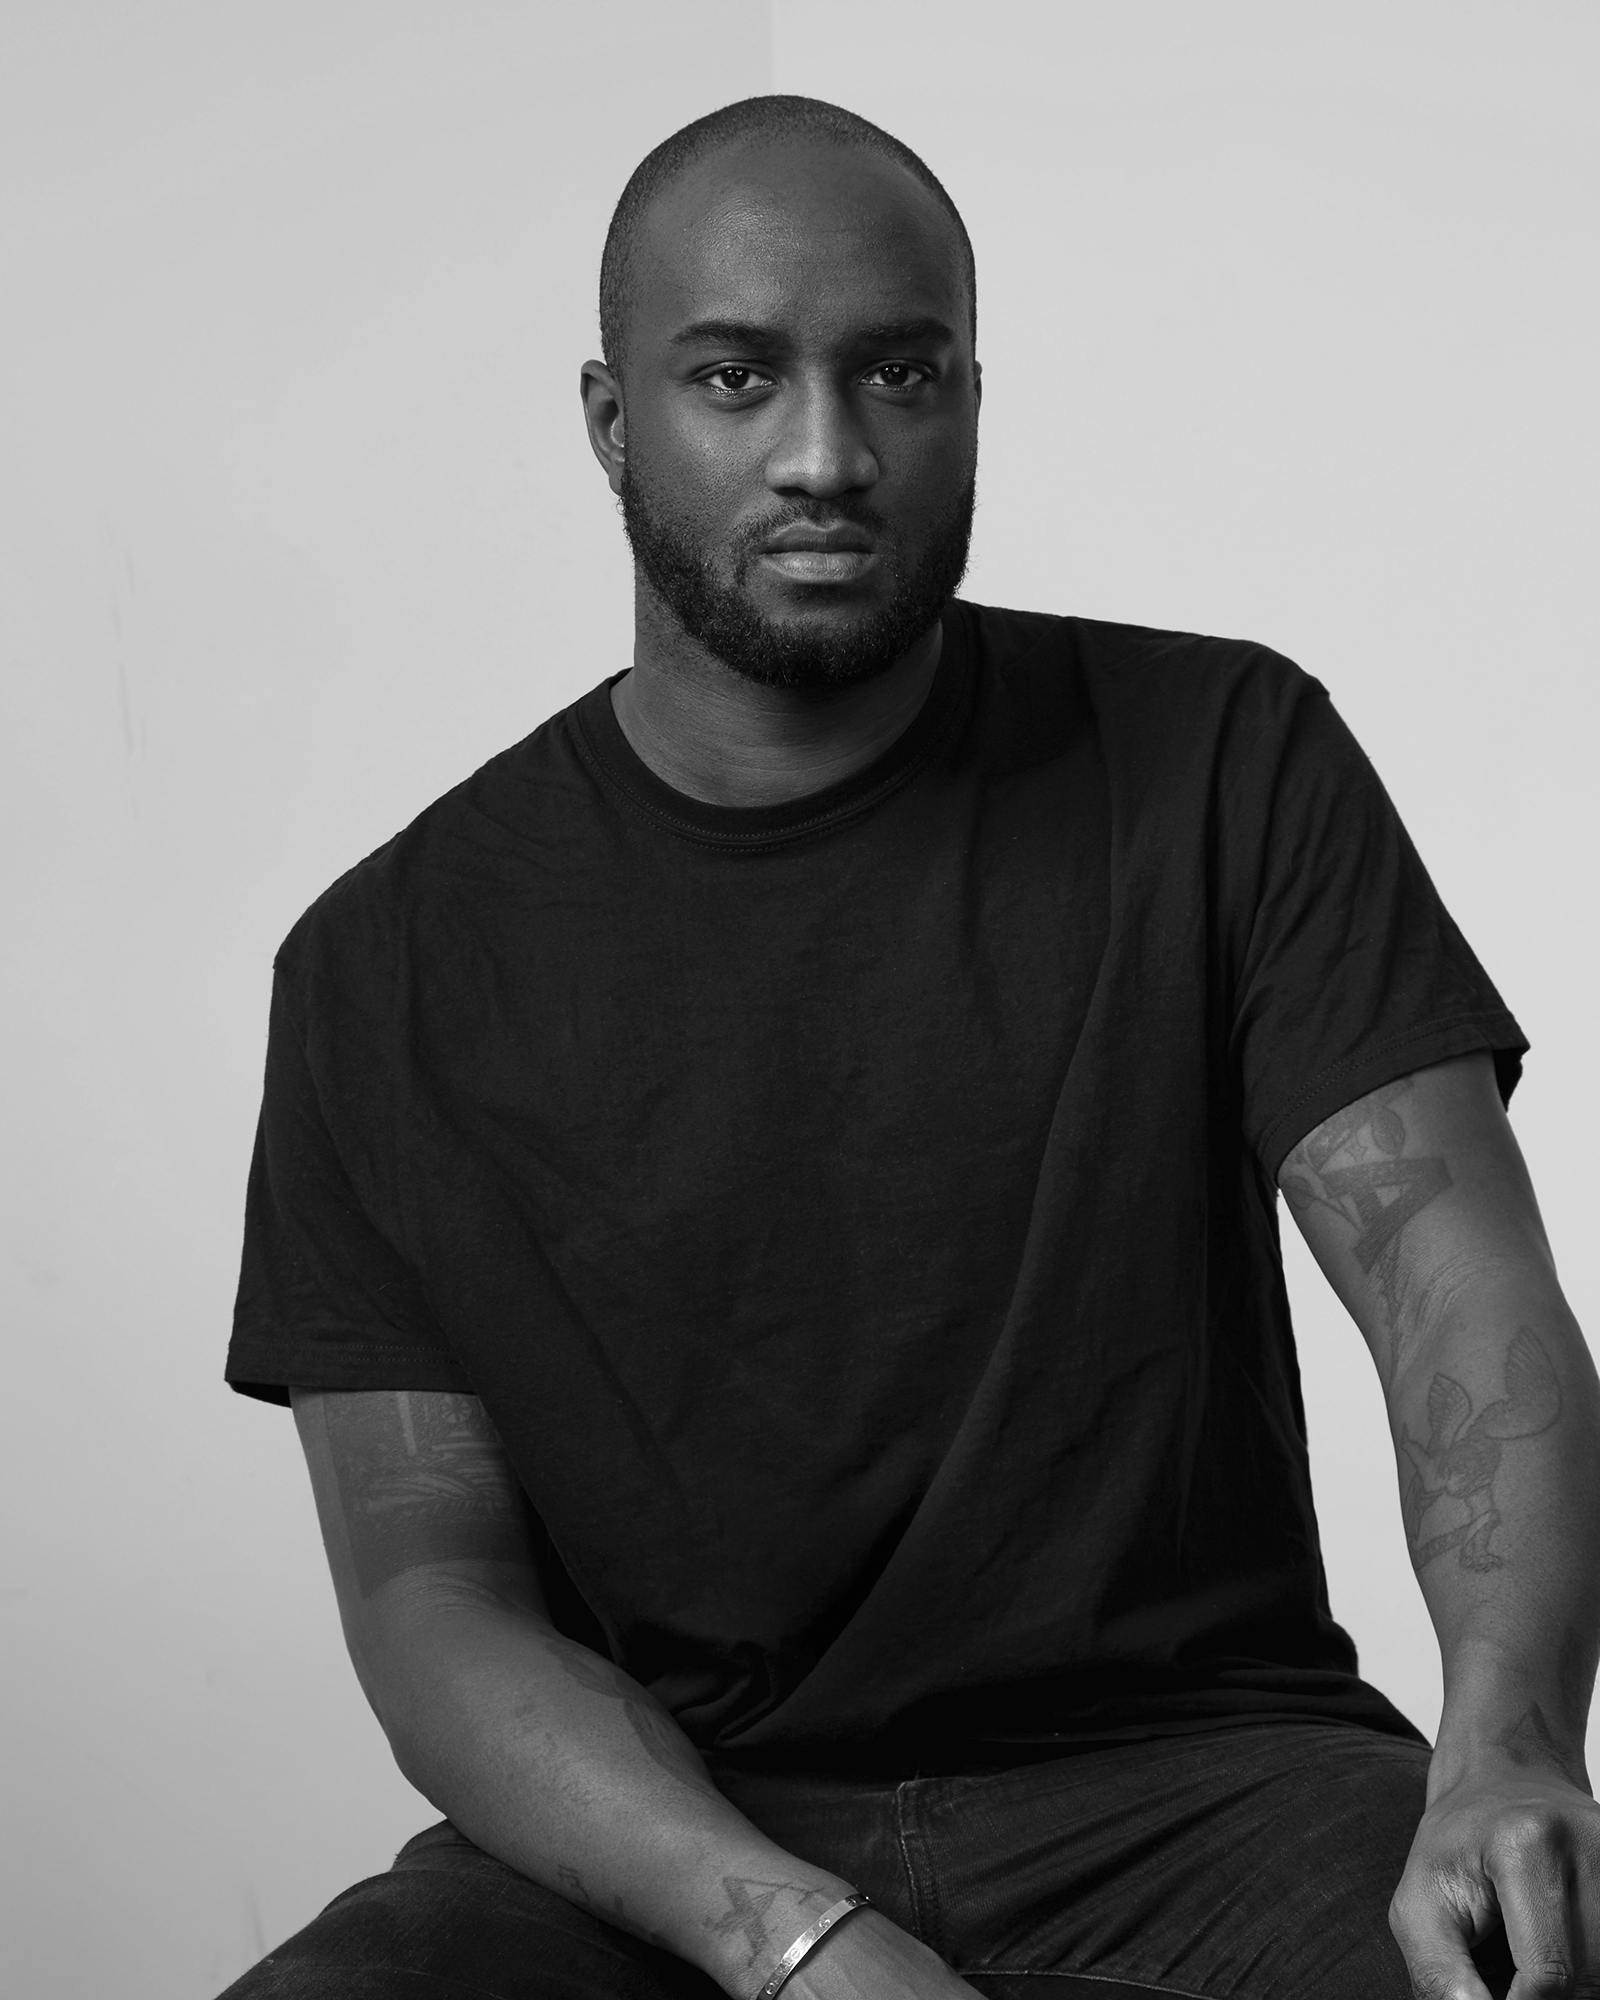 Brooklyn Talks: A Tribute to Virgil Abloh on June 30 at 7 pm, Virgil Abloh,  curator